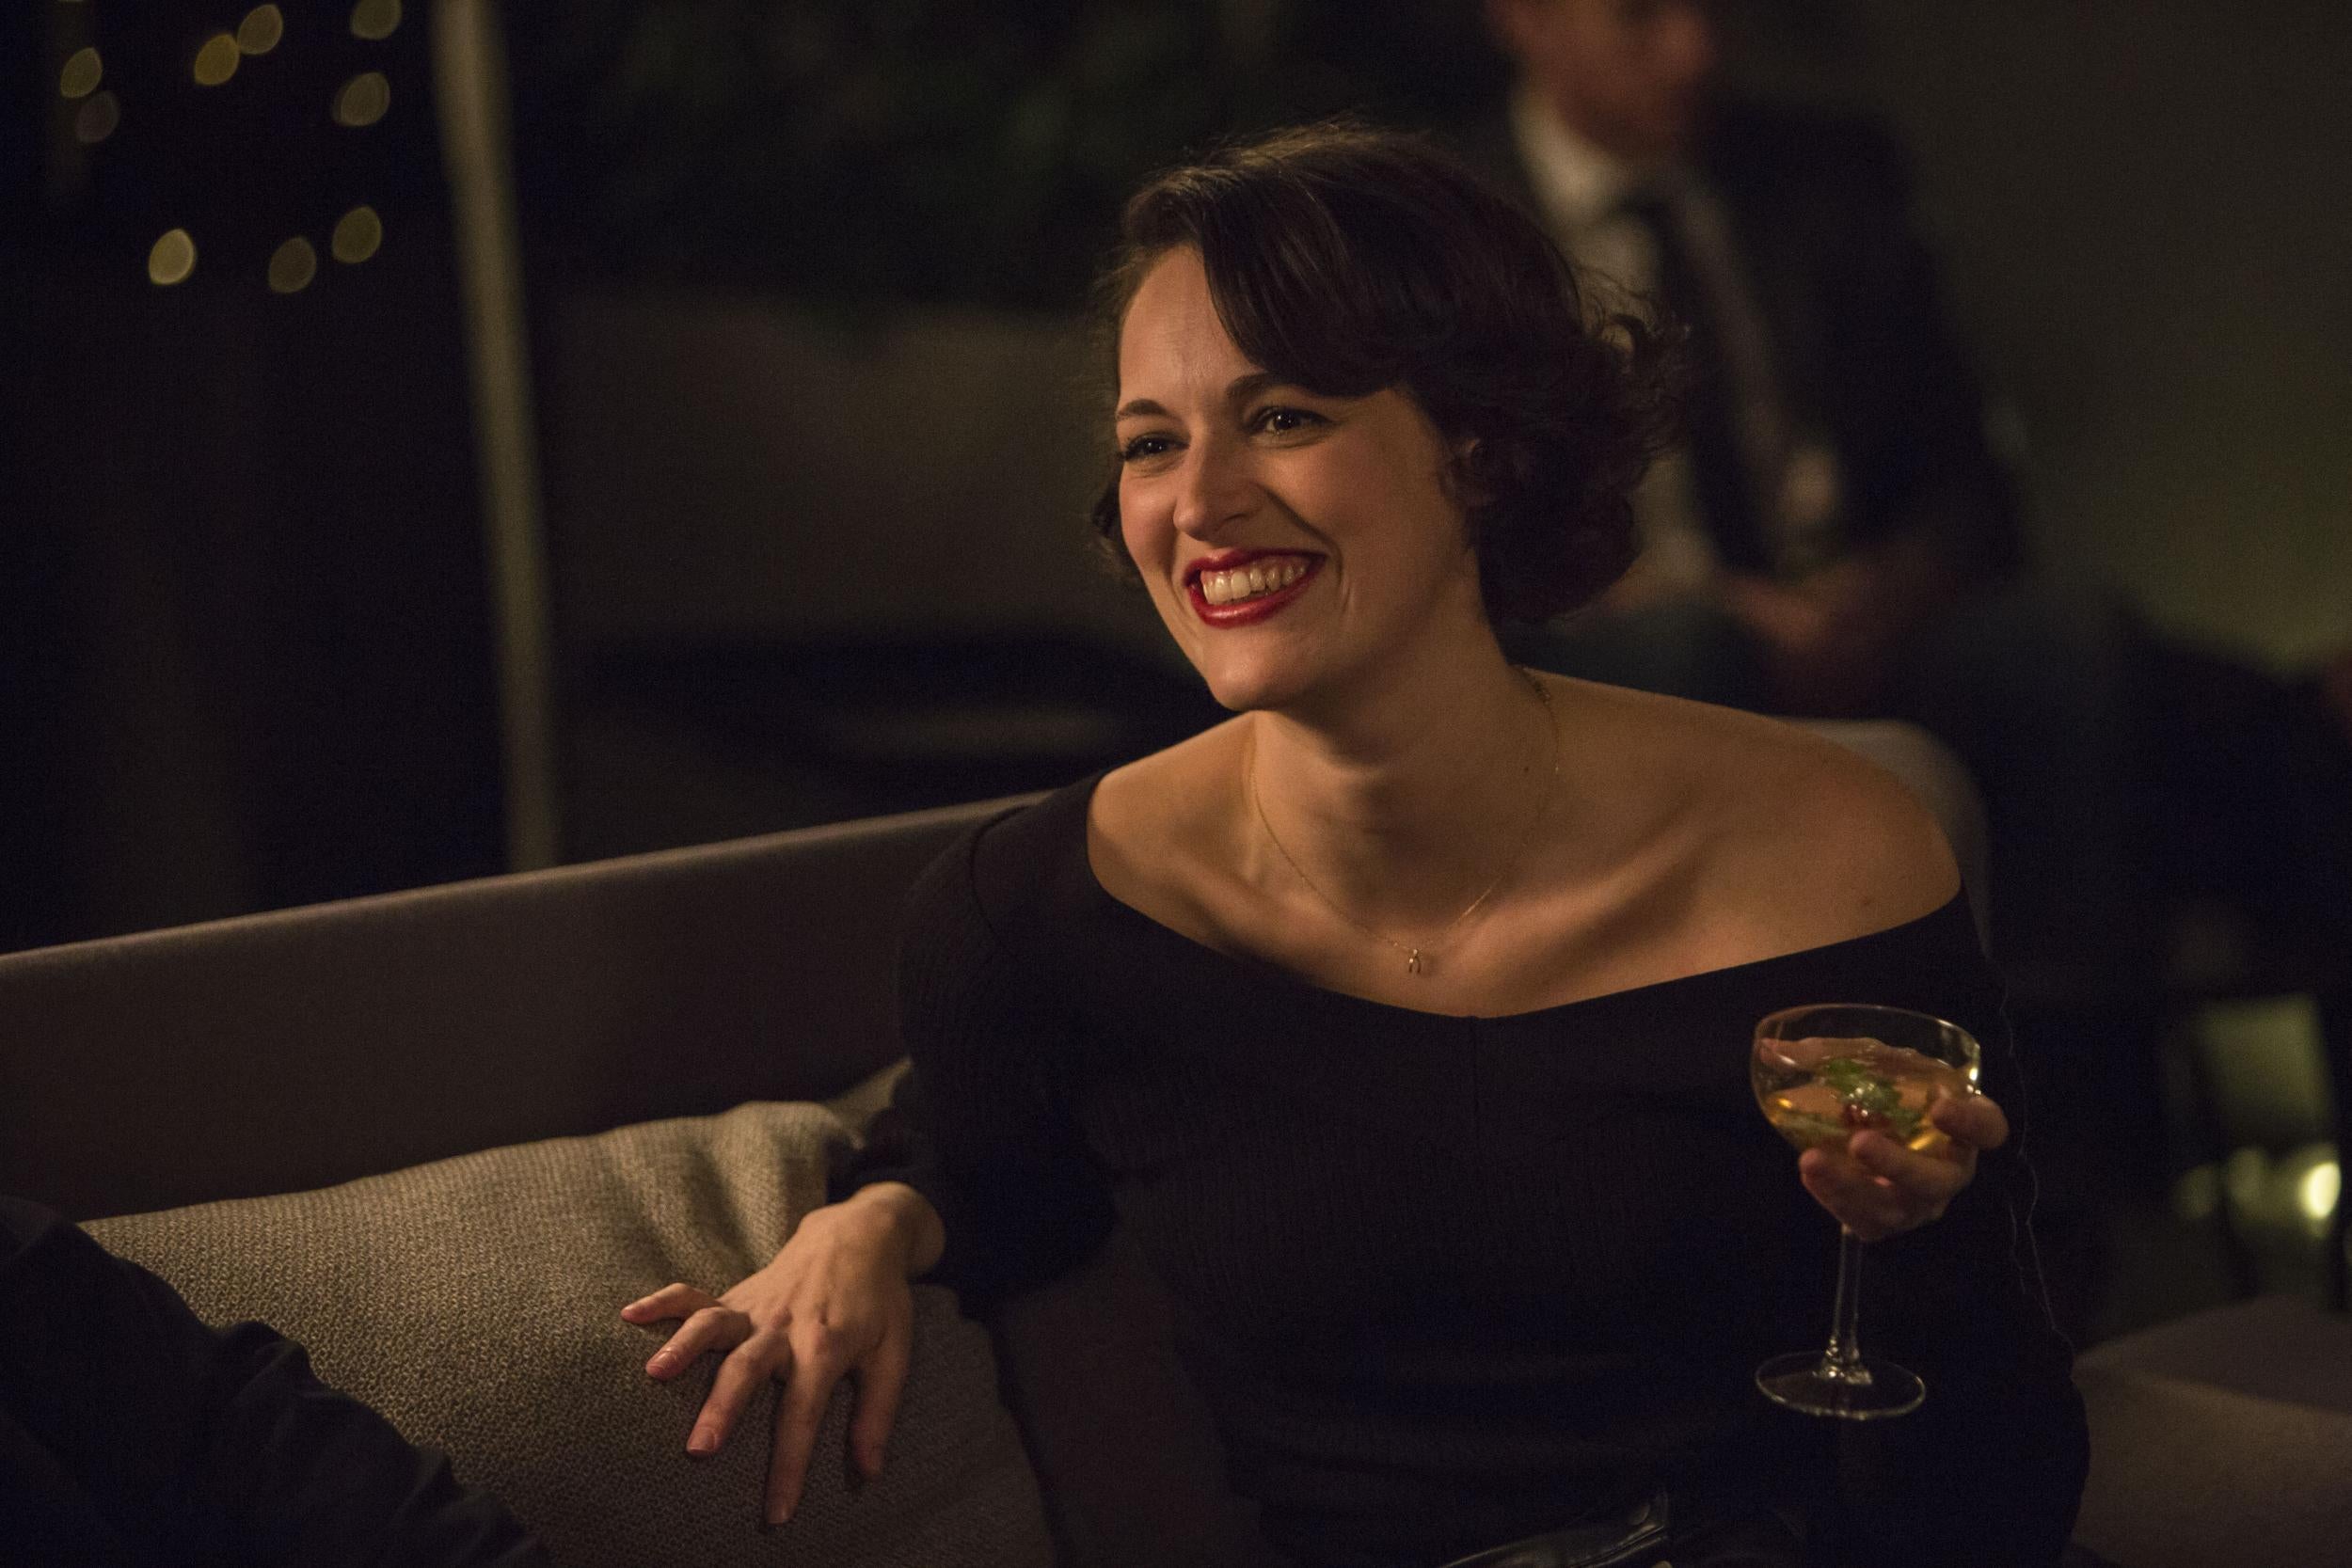 ‘Fleabag’ came to an end with its second series earlier this year